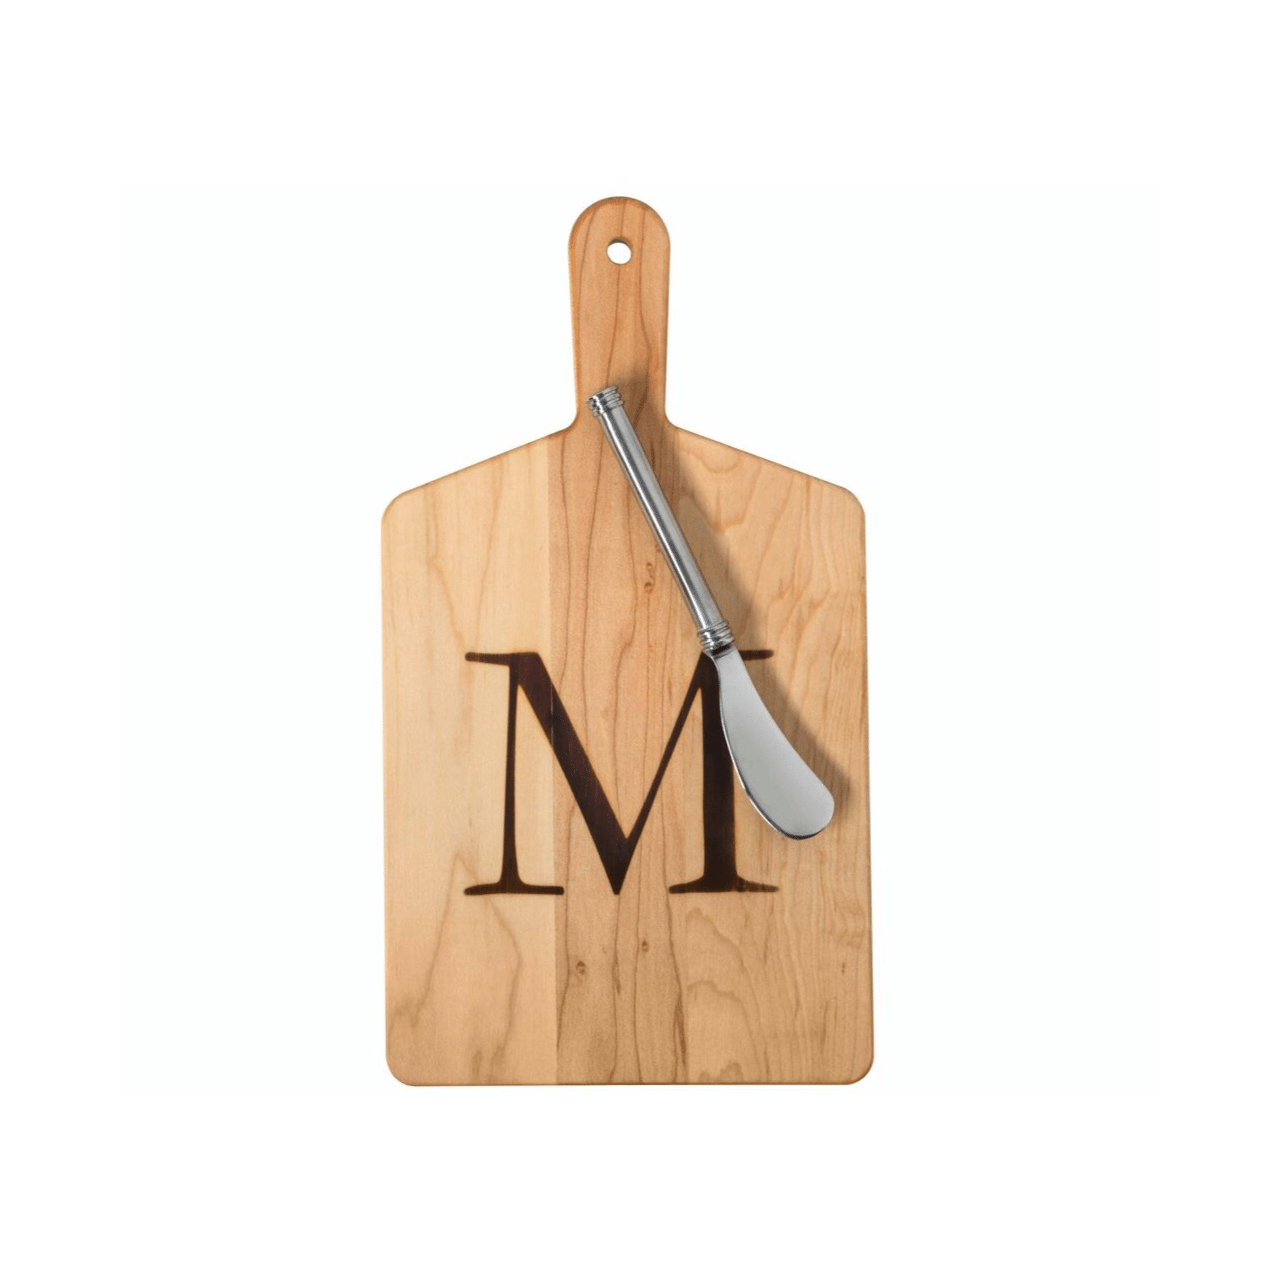 Maple Cheese Board with a Stamped W and Metal Spreader